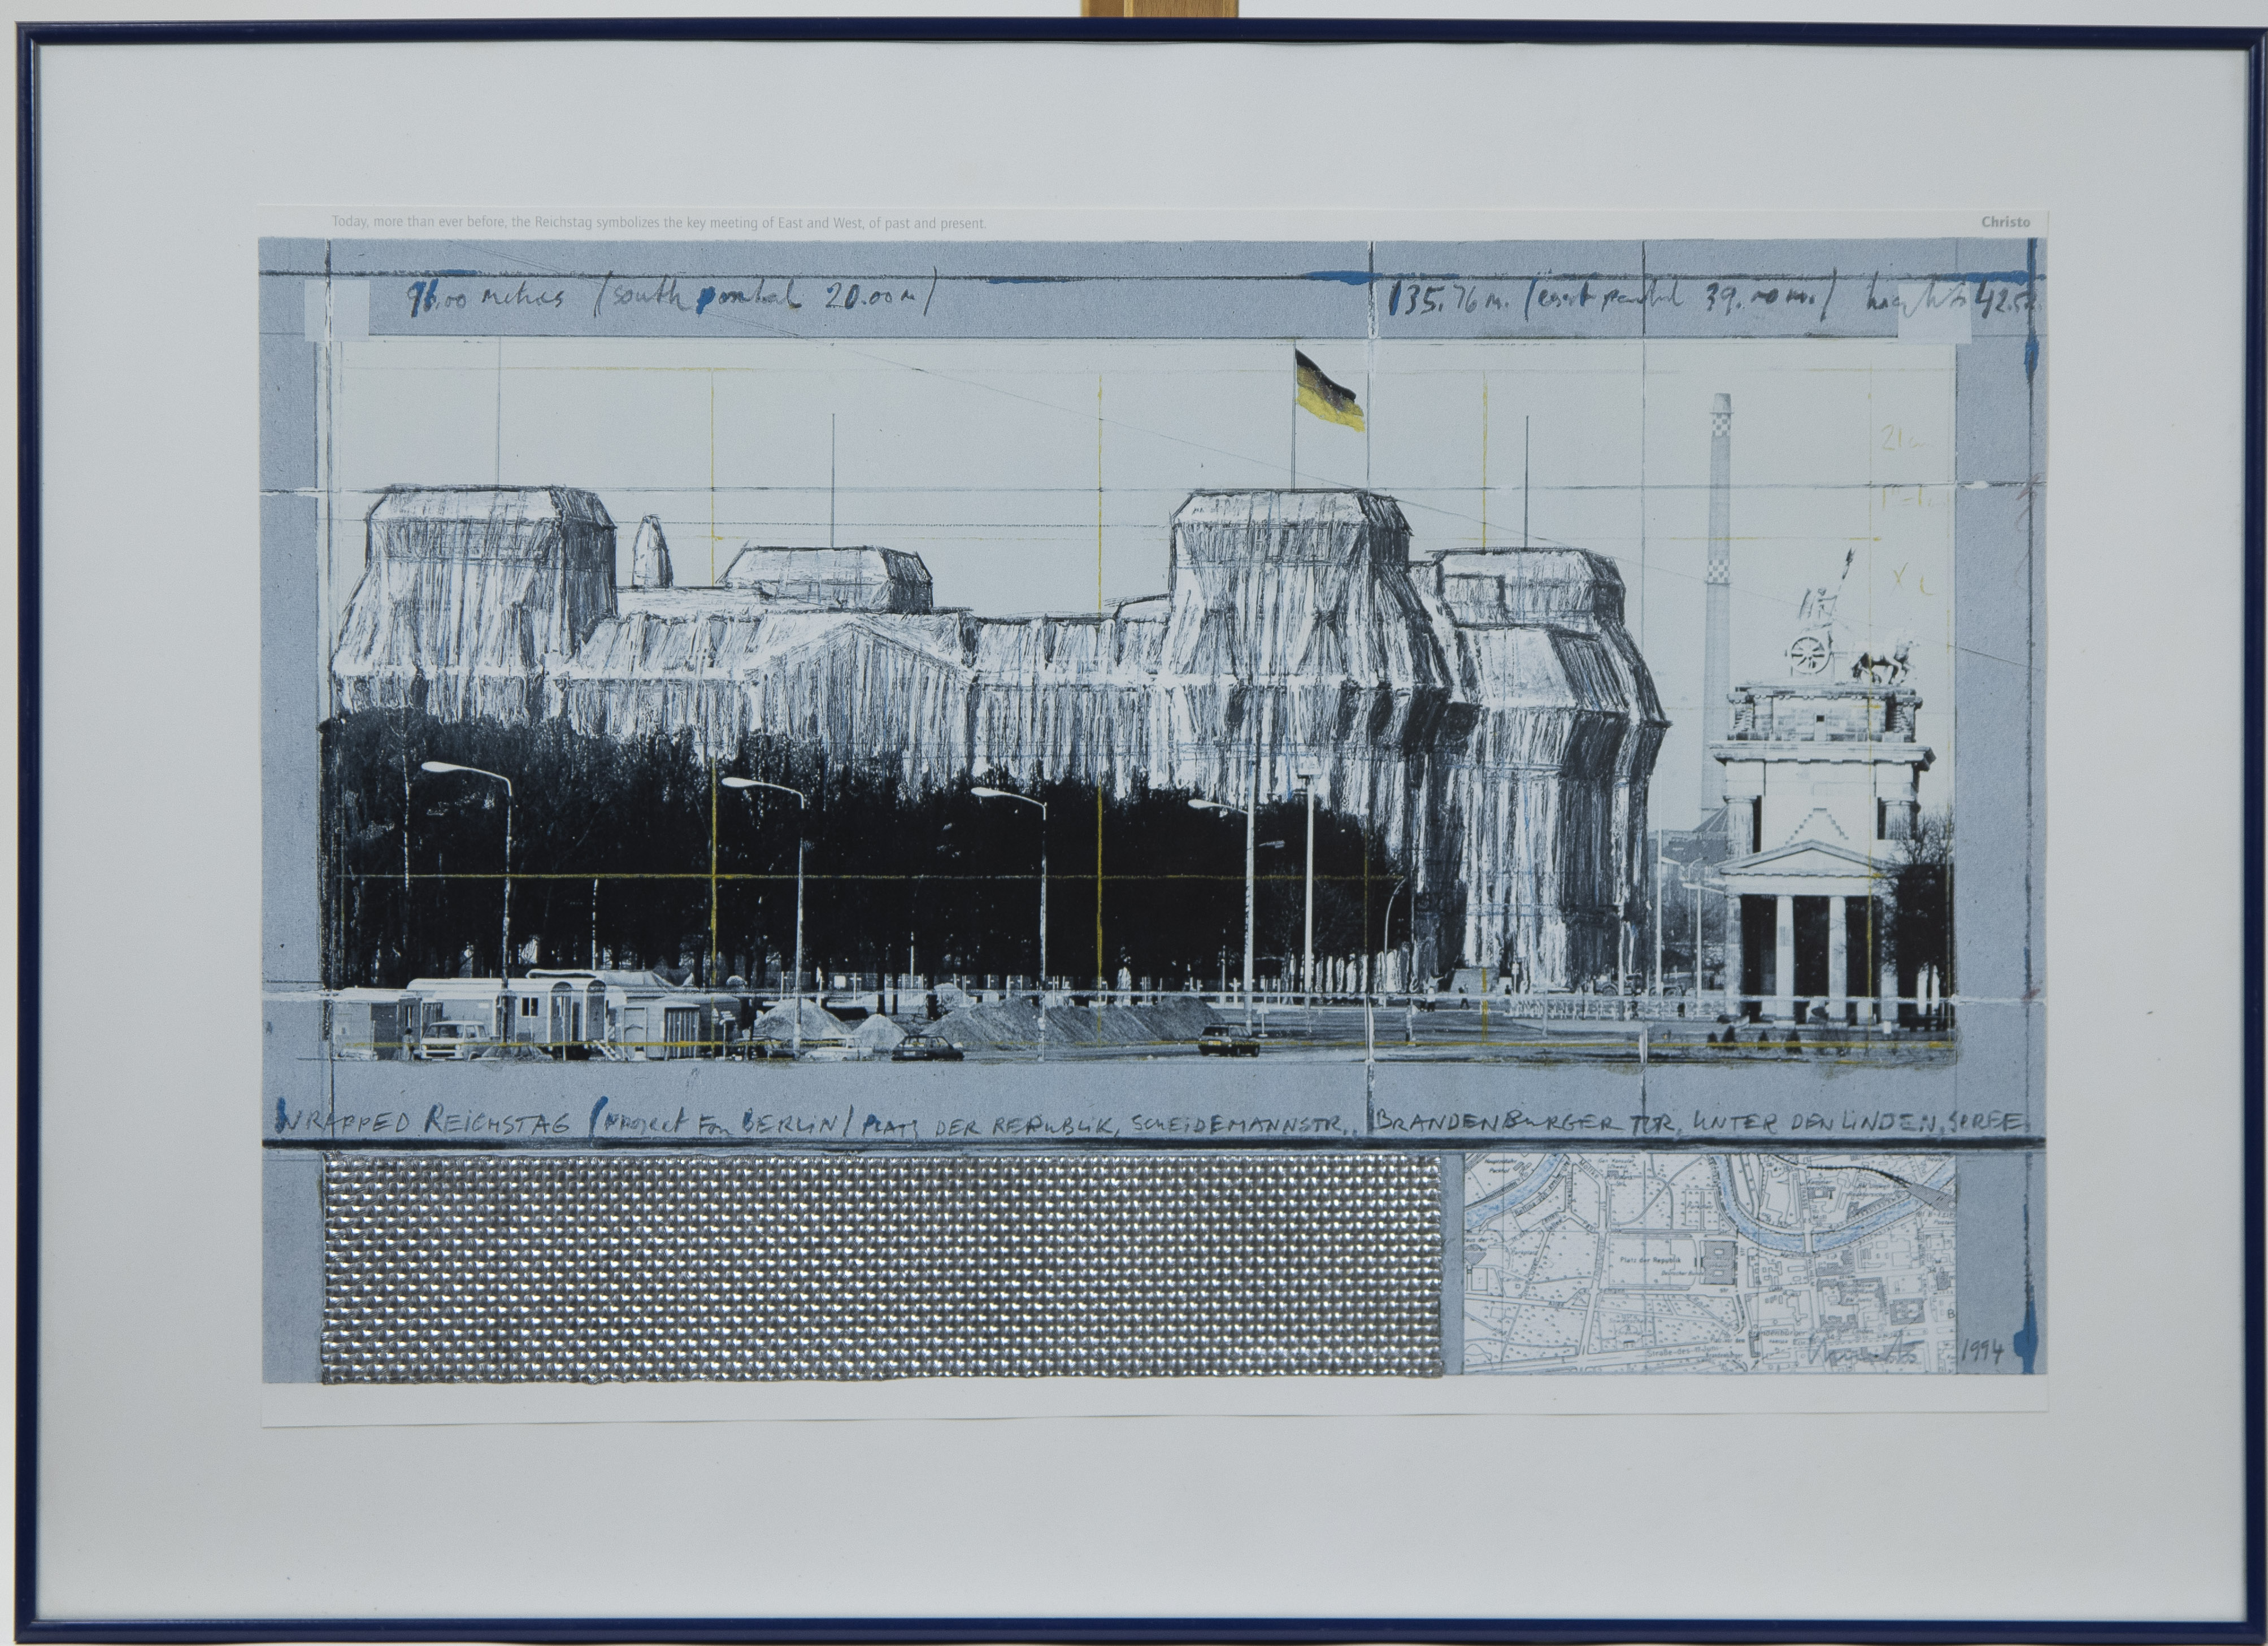 CHRISTO (1935-2020), offset lithography Projekt für Berlin, Wrapped Reichstag en The Wrapped Reichst - Image 4 of 5